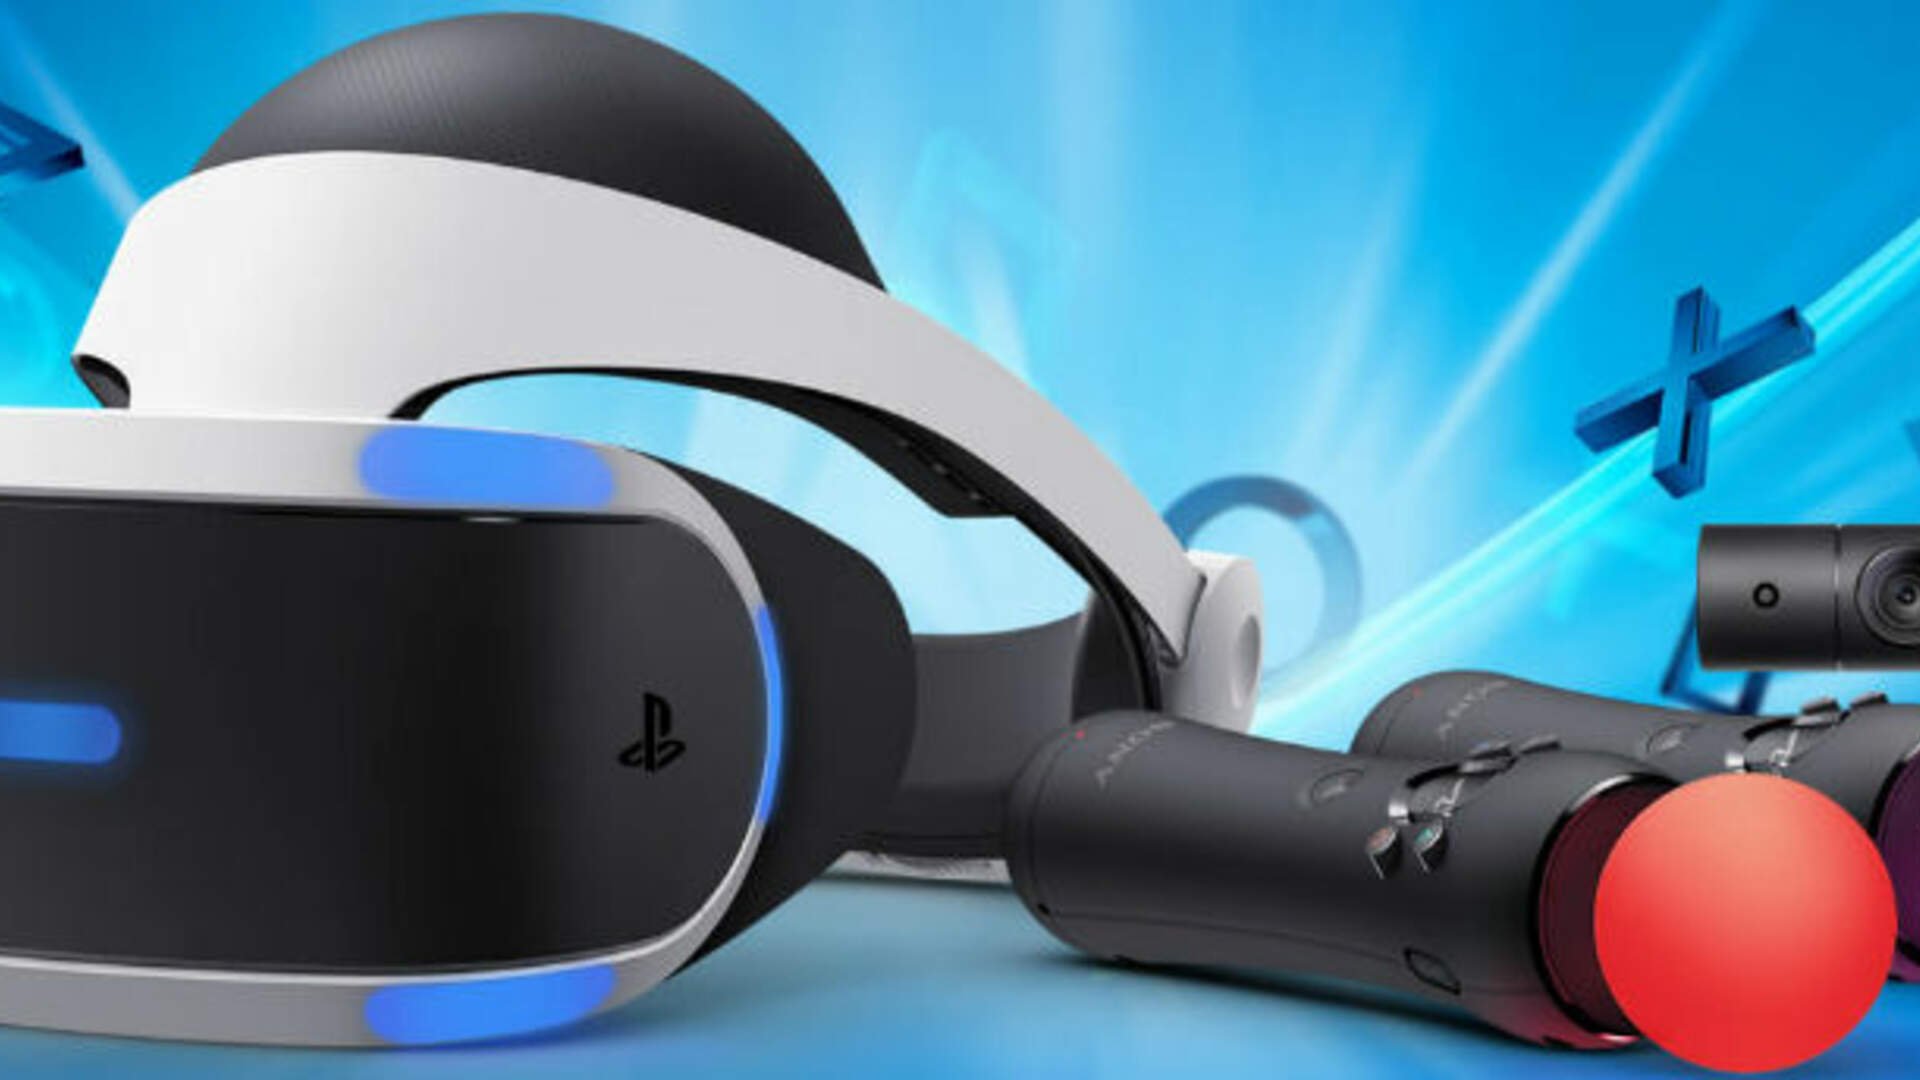 PlayStation VR Sells Nearly a Million Units Across Four Months